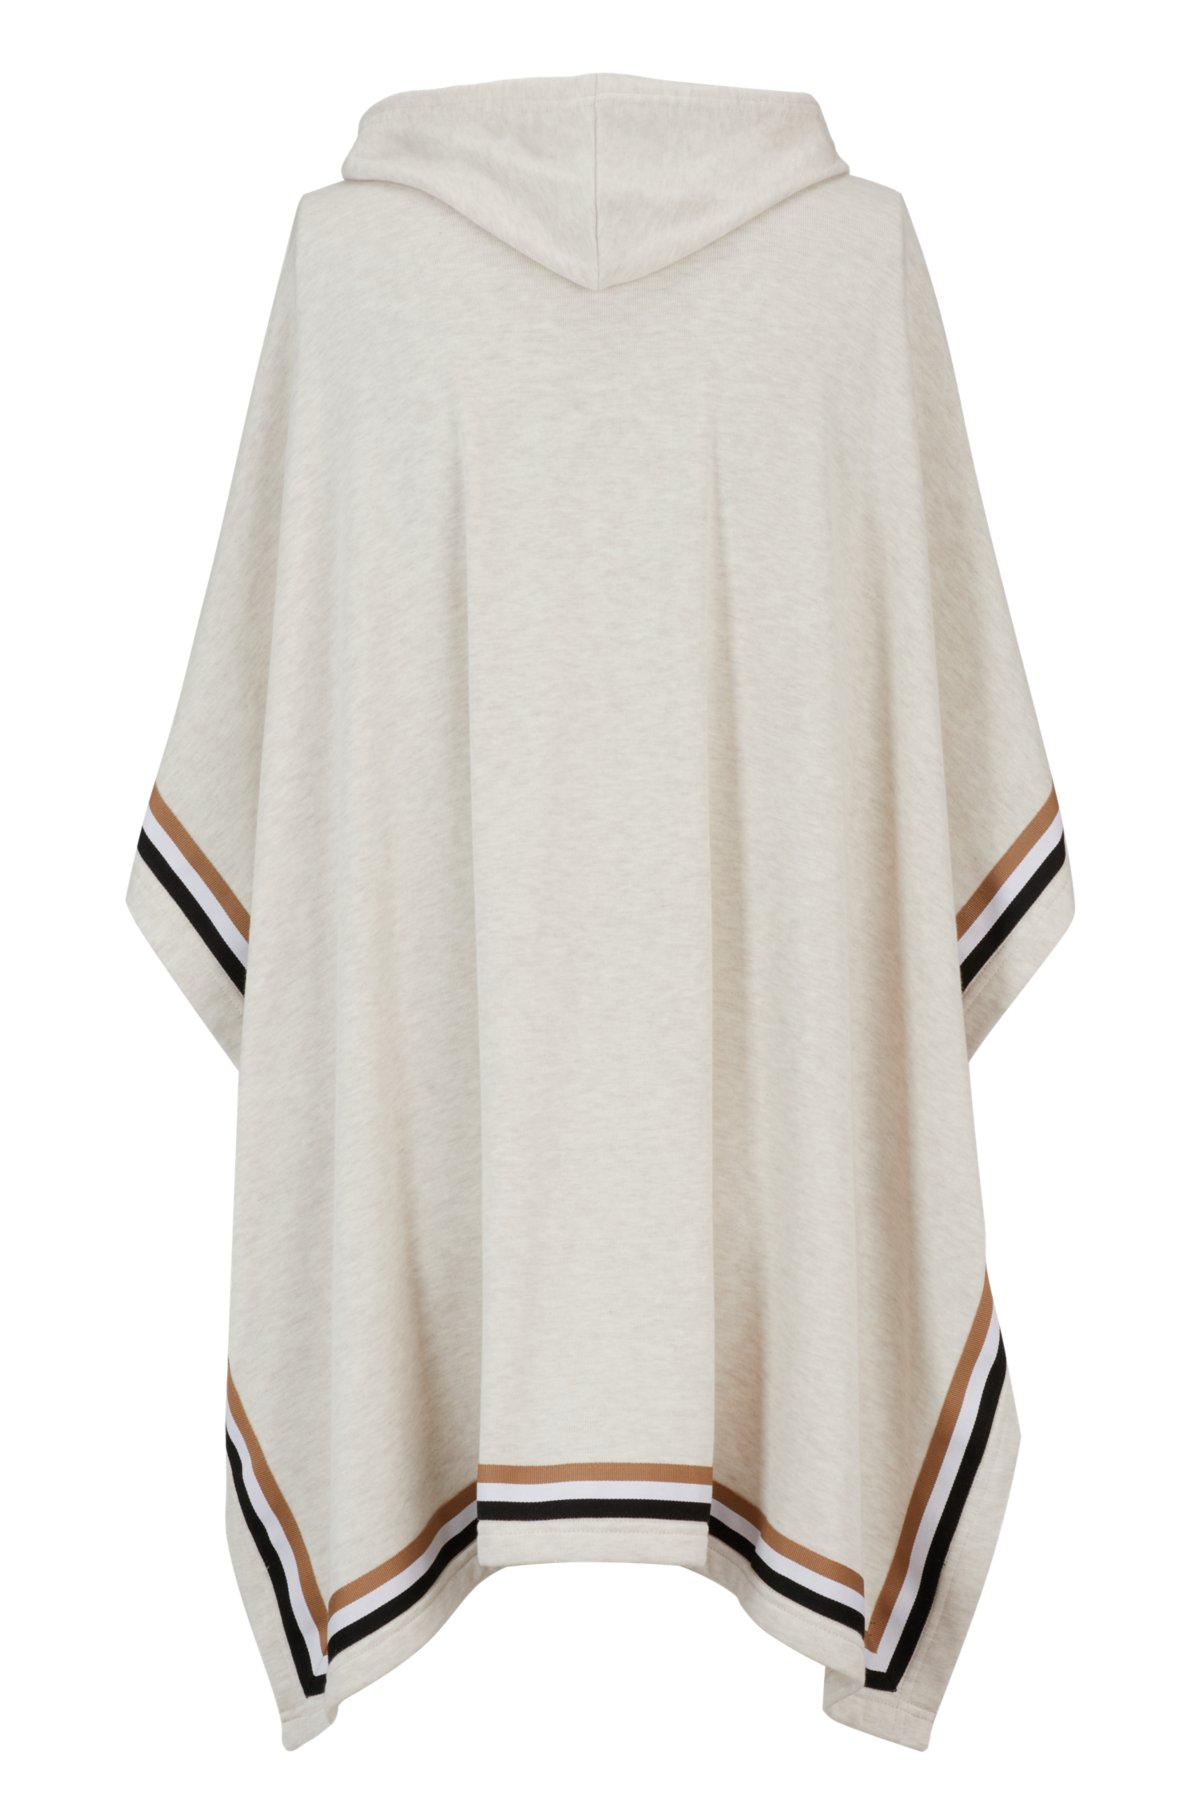 Hooded beach poncho with logo and signature stripes, Light Beige